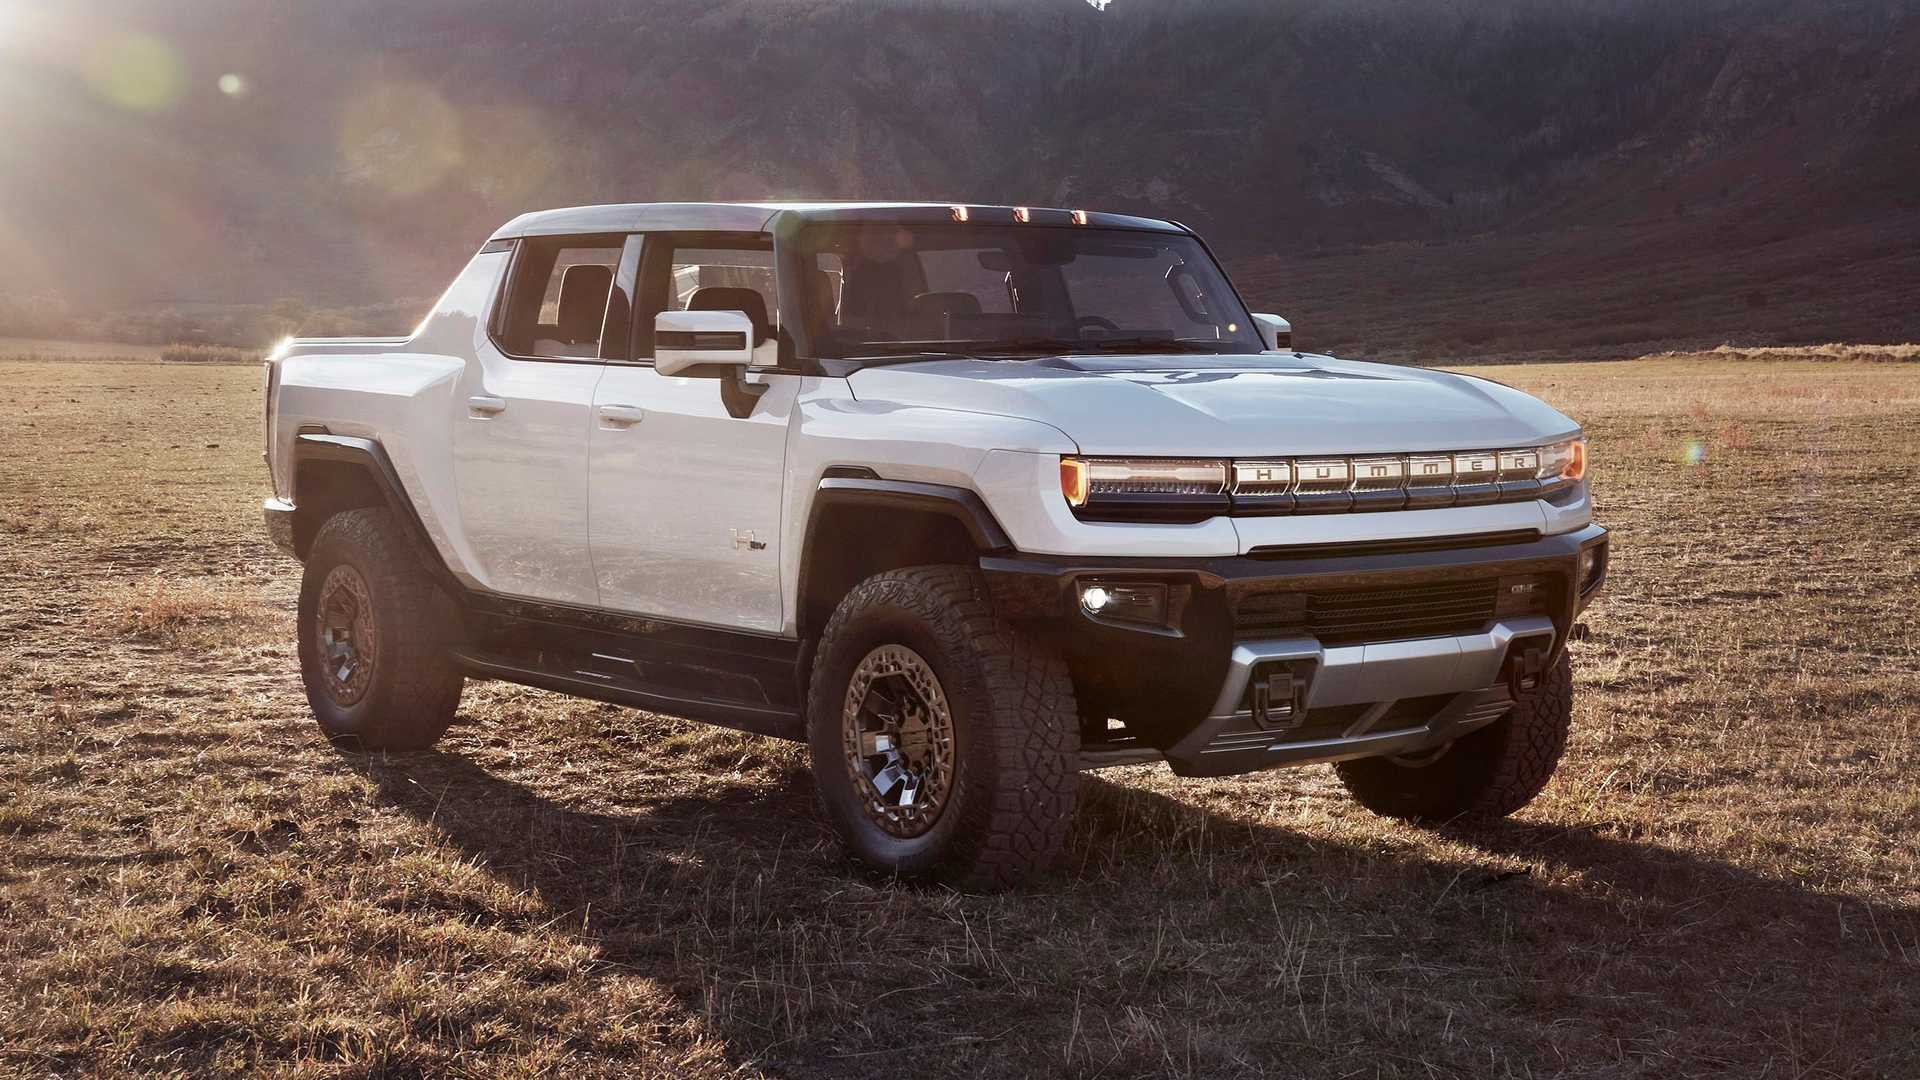 2022 GMC Hummer EV: Pics, Specs, Price, And More